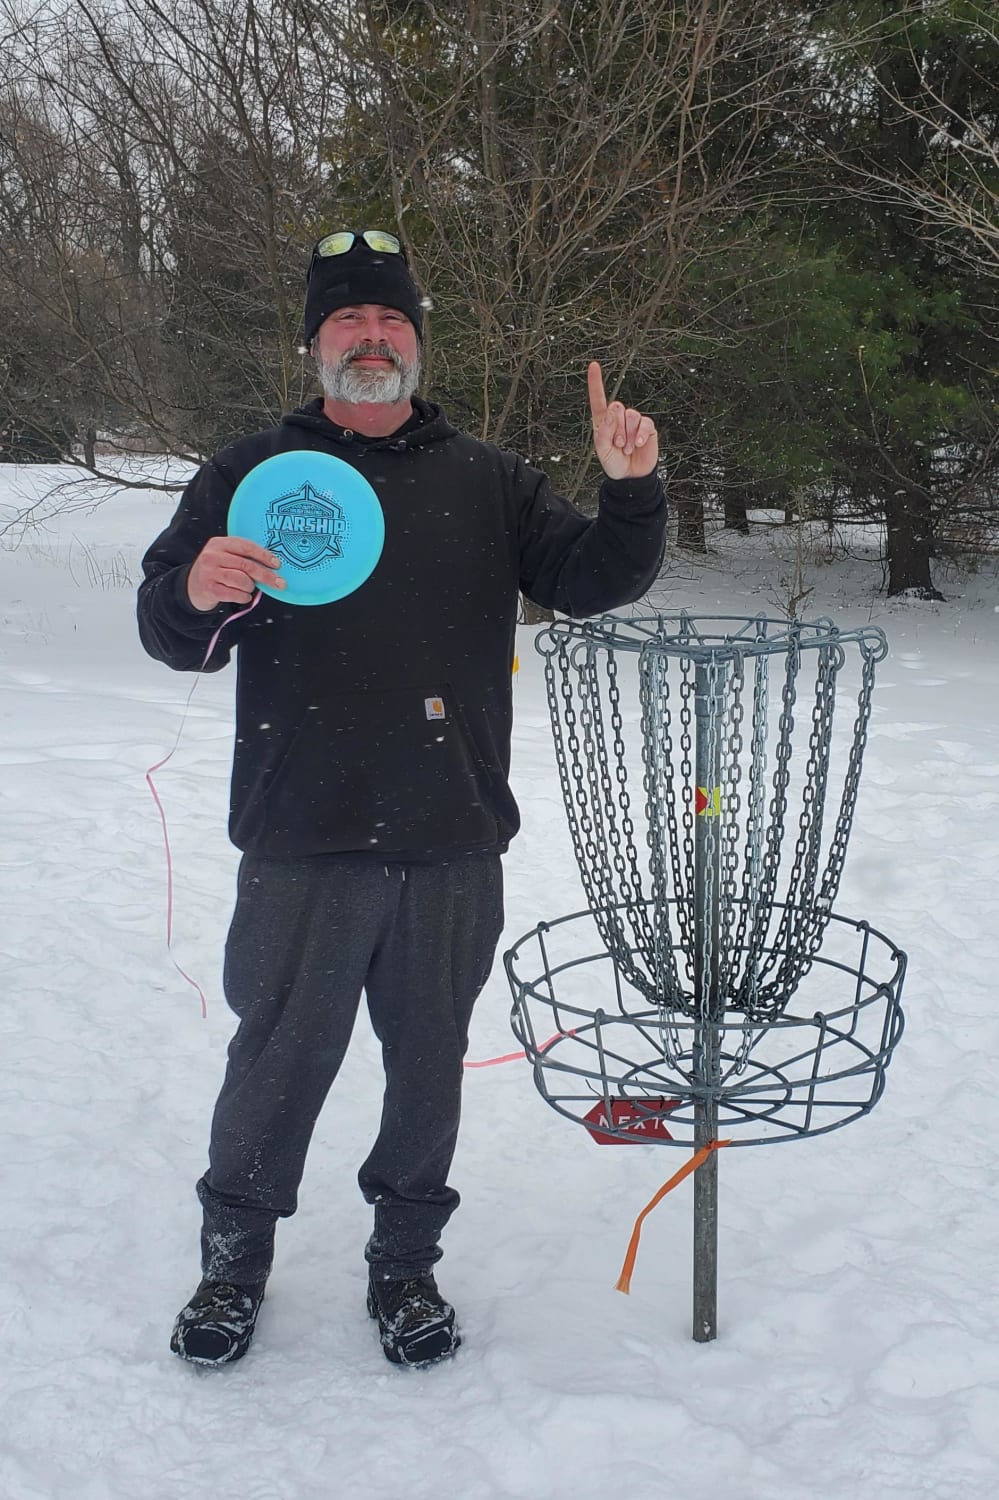 Played my first game of disc golf 15 years ago. Today I FINALLY got my first ace. Hole 12, Magnolia/Acer at the arboretum in Guelph.